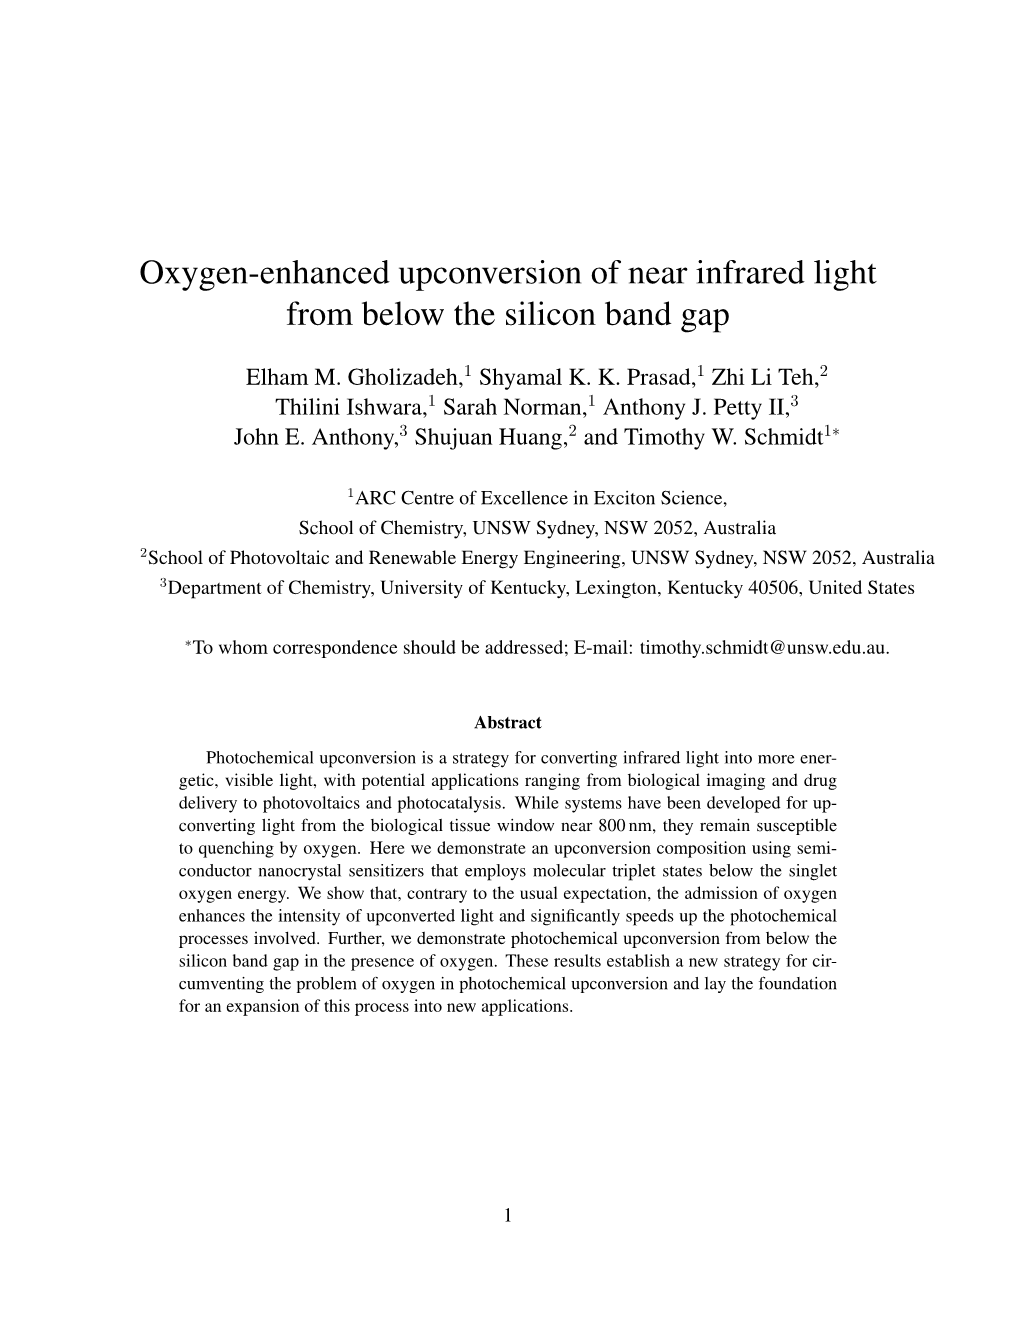 Oxygen-Enhanced Upconversion of Near Infrared Light from Below the Silicon Band Gap